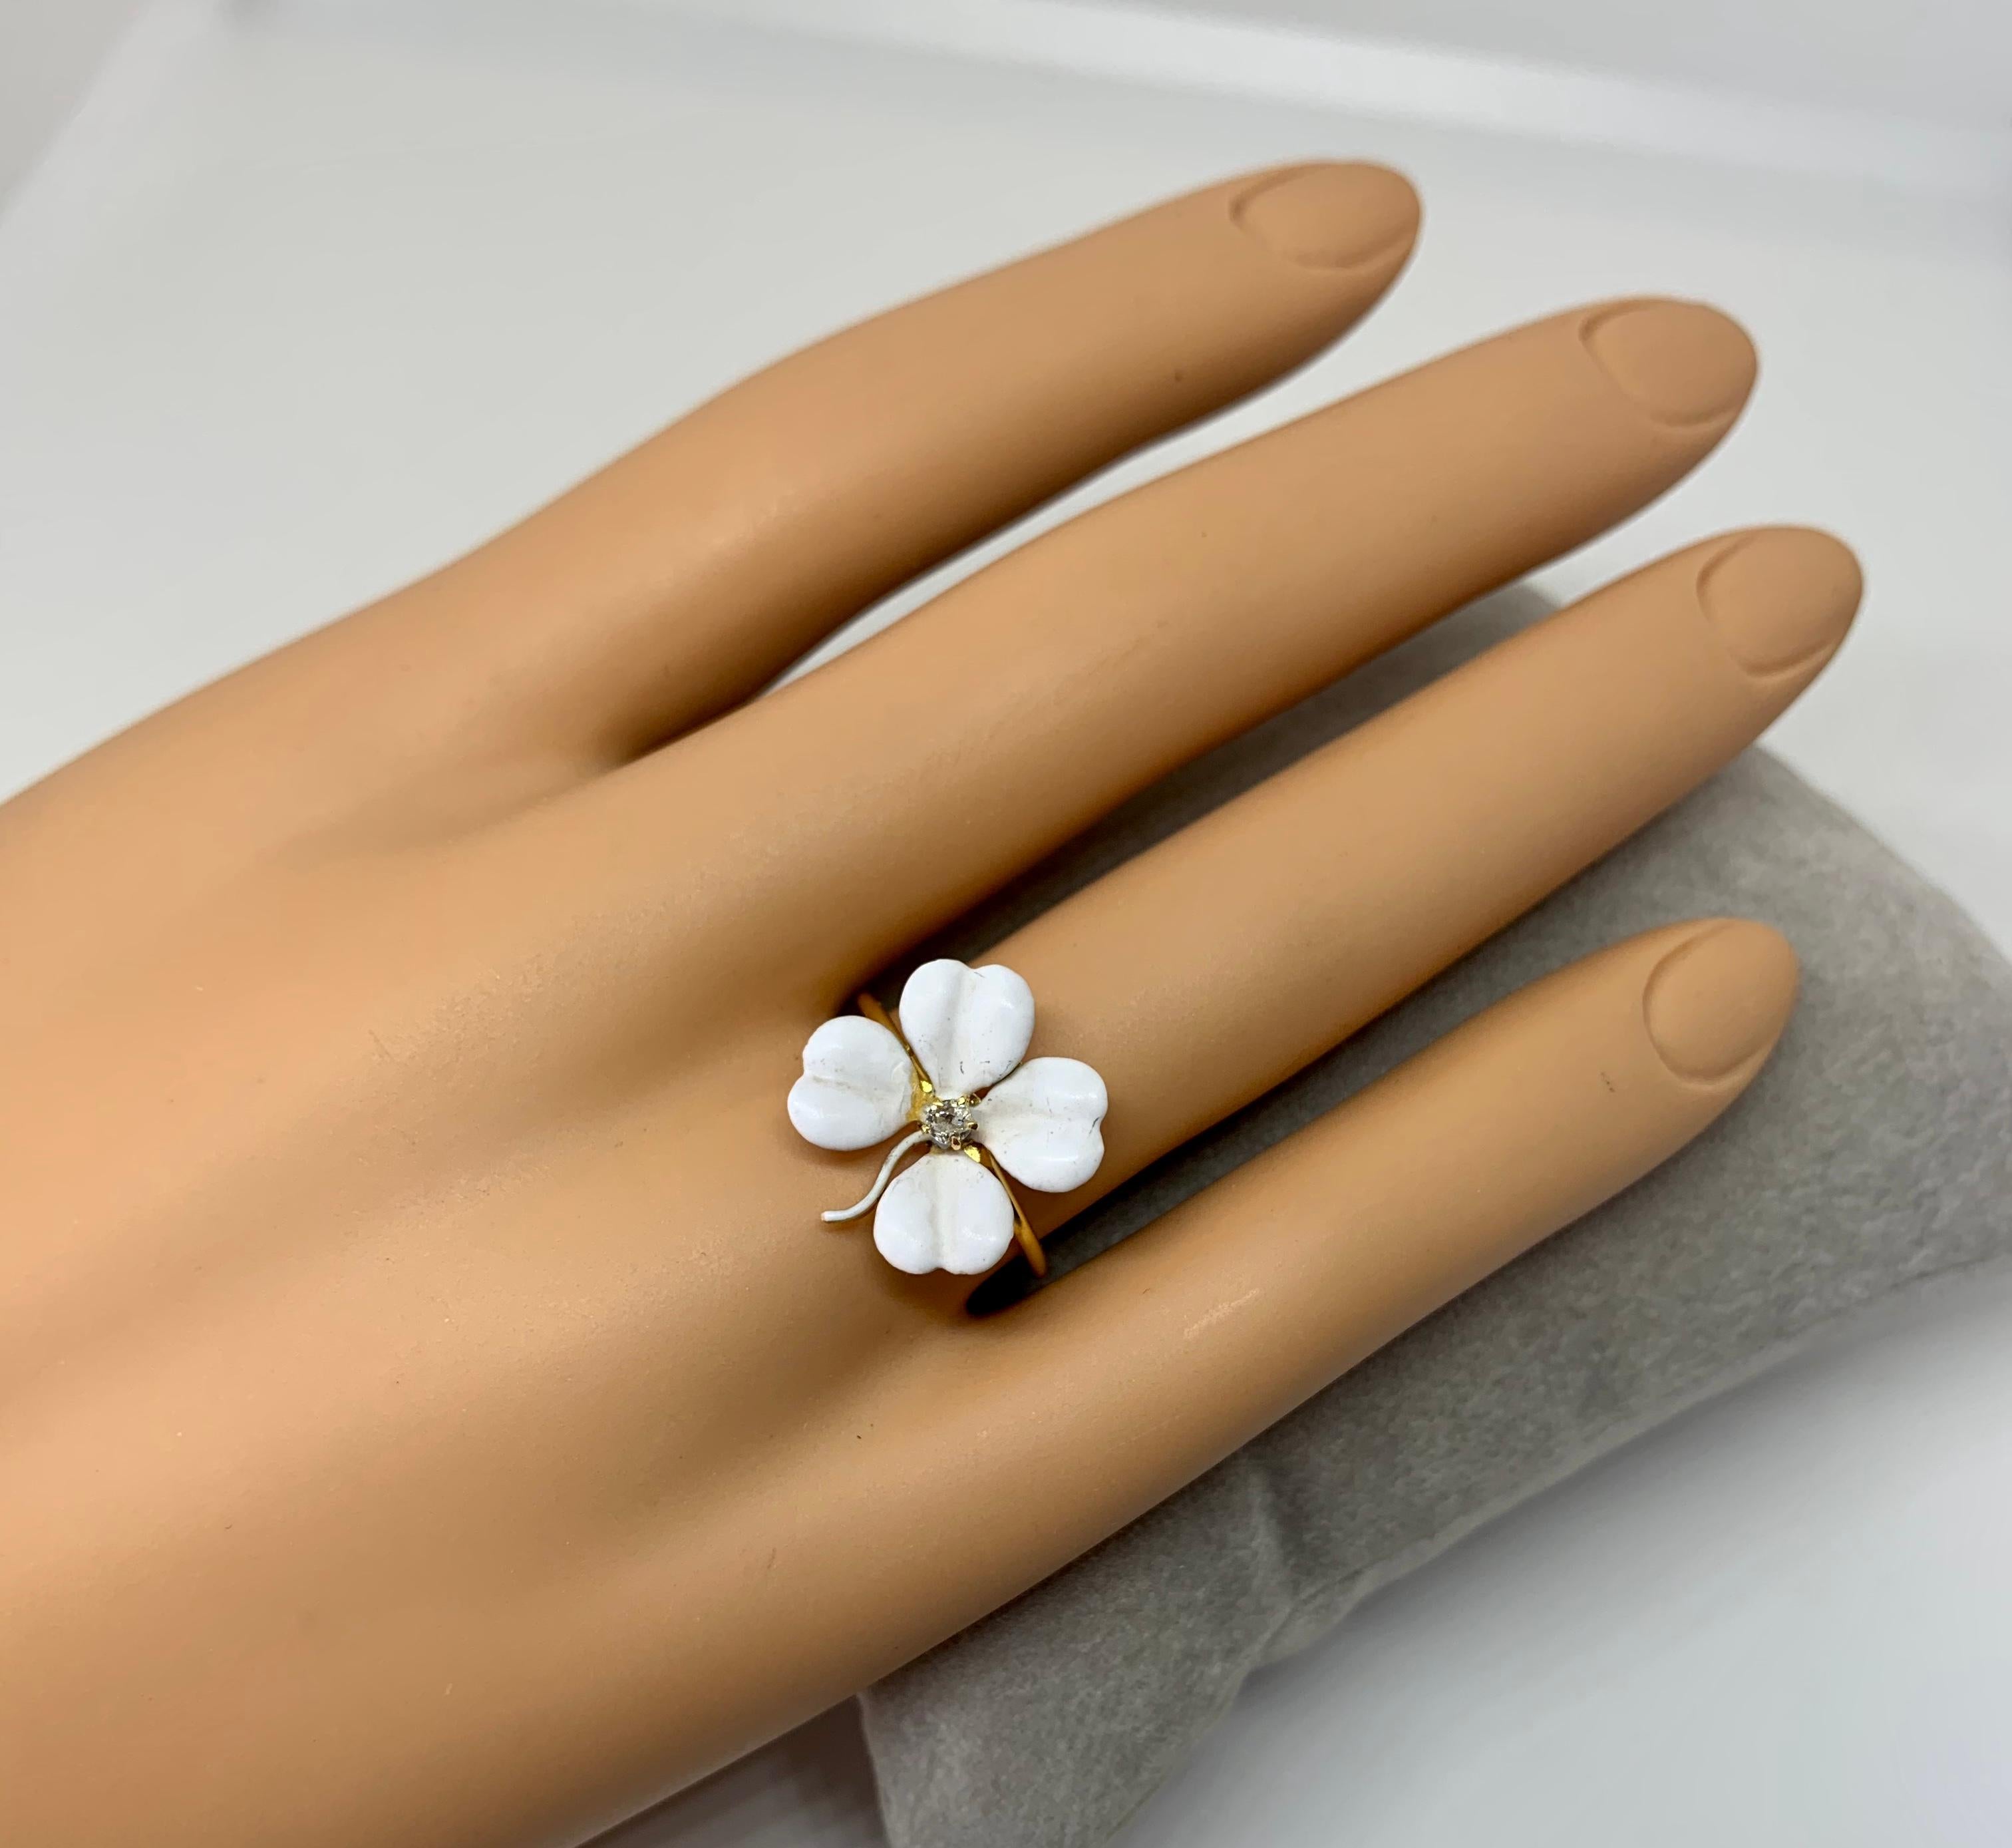 This is a very special antique Victorian - Edwardian Ring in the form of a Four Leaf Clover Flower in gorgeous white enamel with a central antique Old Mine Cut Diamond.  The beautiful clover flower is done with exquisite enamel work and in an